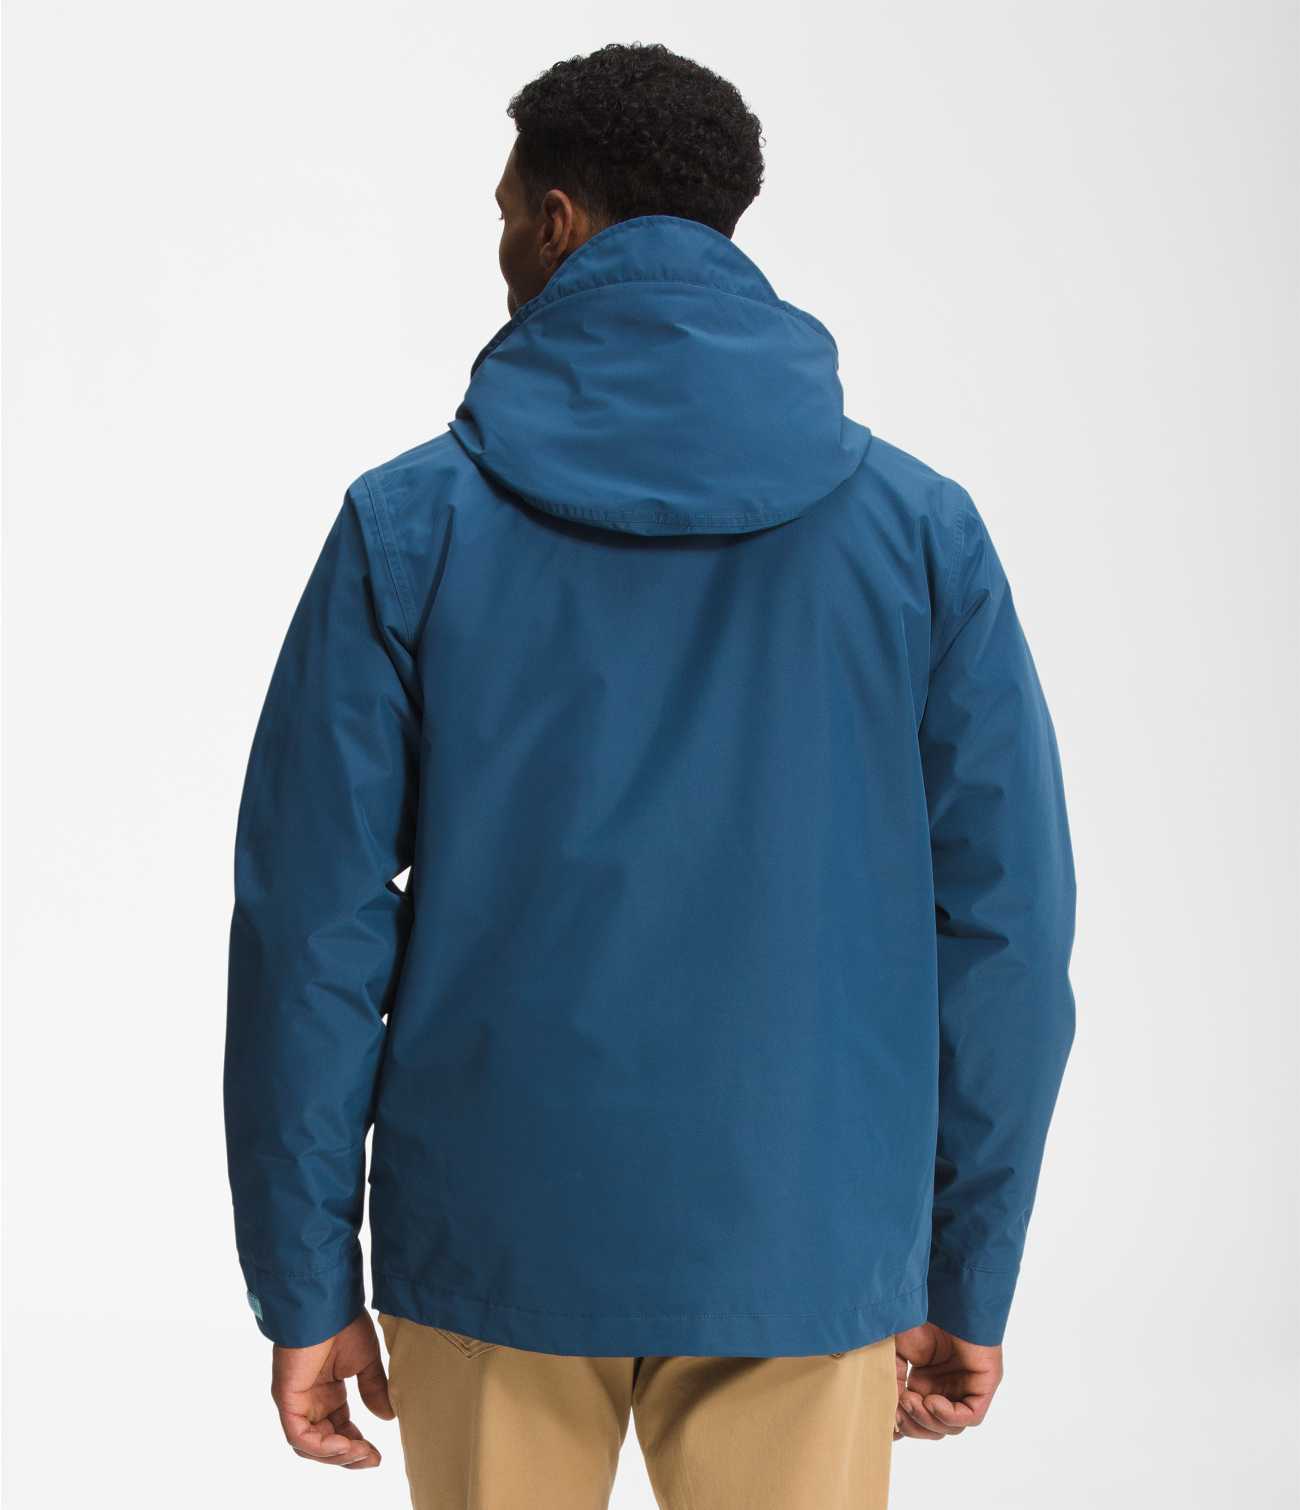 MEN'S FINE PINE JACKET | The North Face | The North Face Renewed